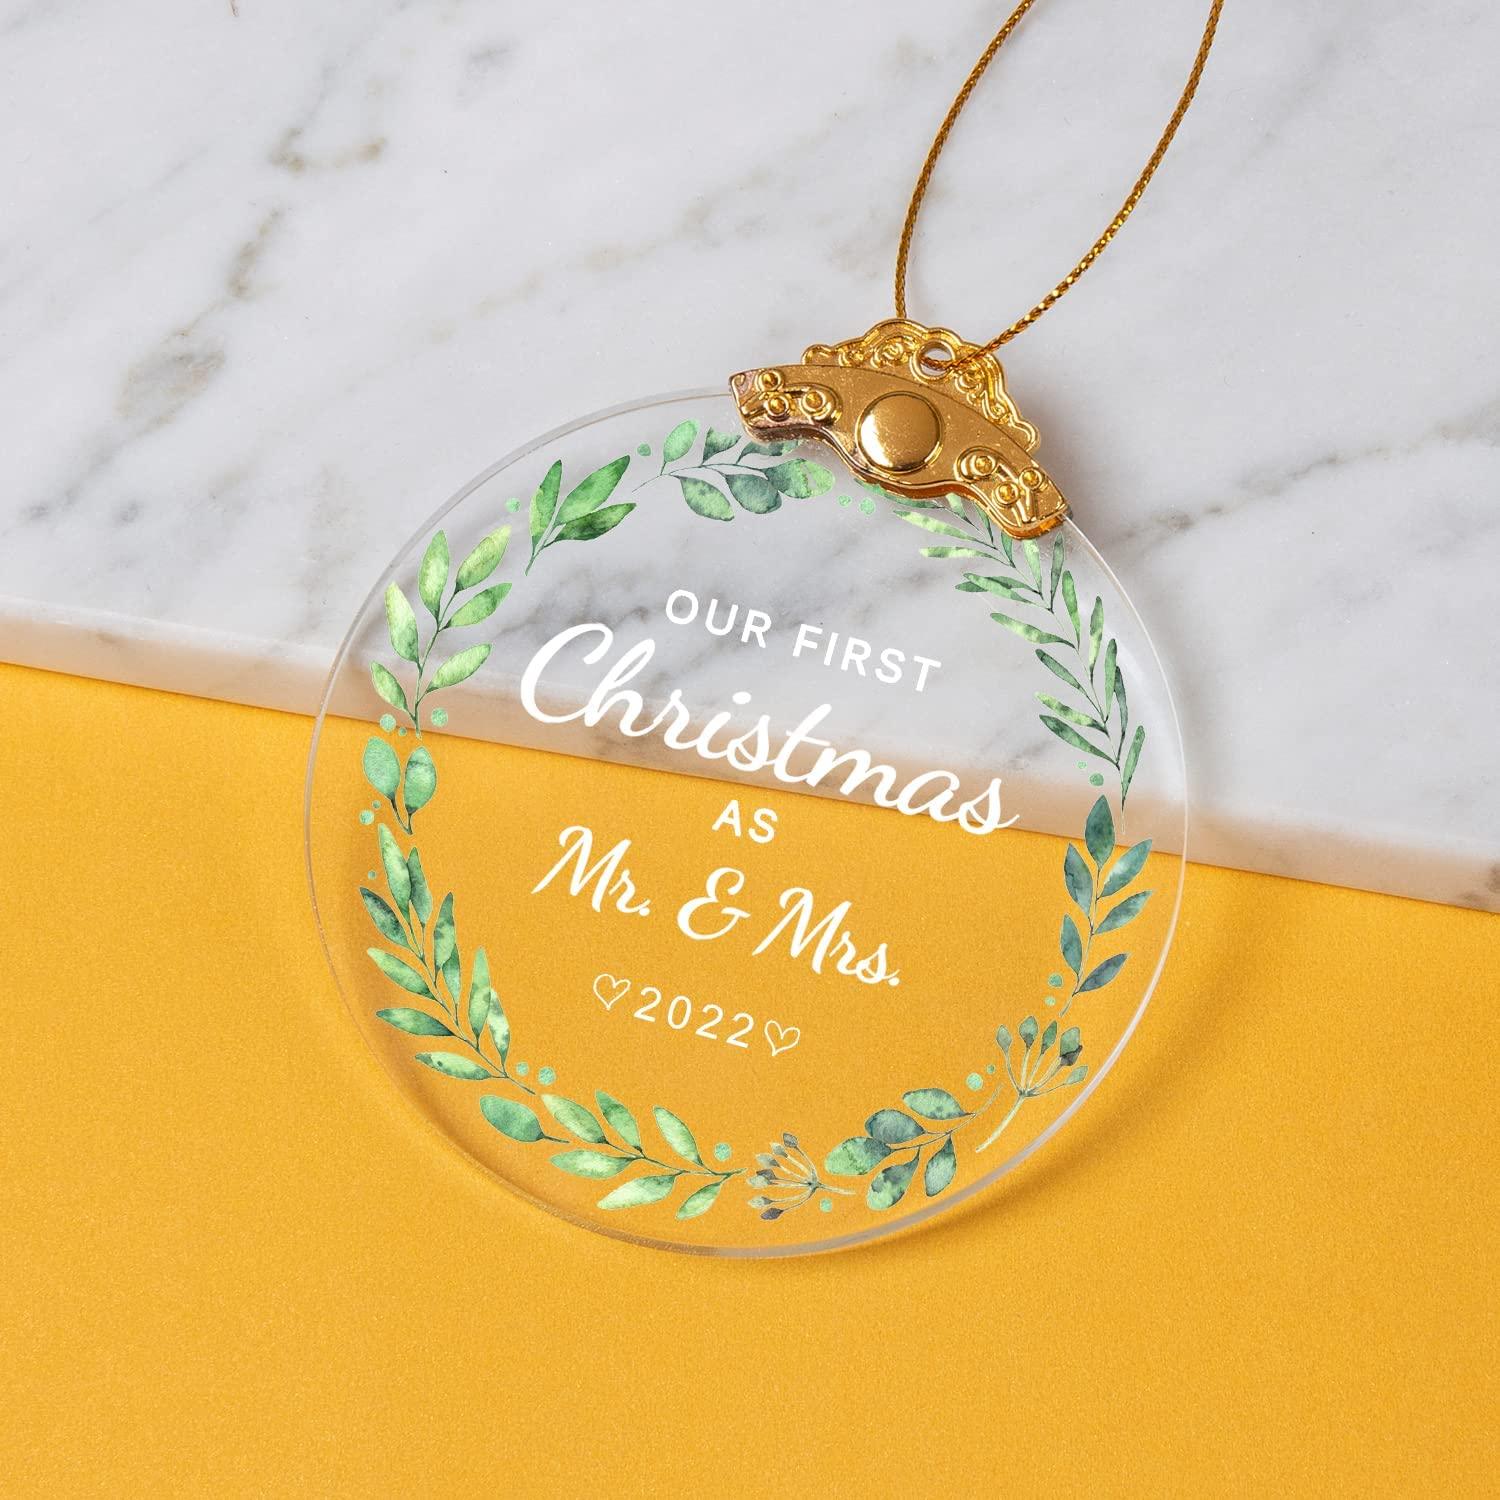 Our First Christmas As Mr & Mrs 2022 Glass Ornament/Keepsake, Wedding Decoration Ornaments - If you say i do